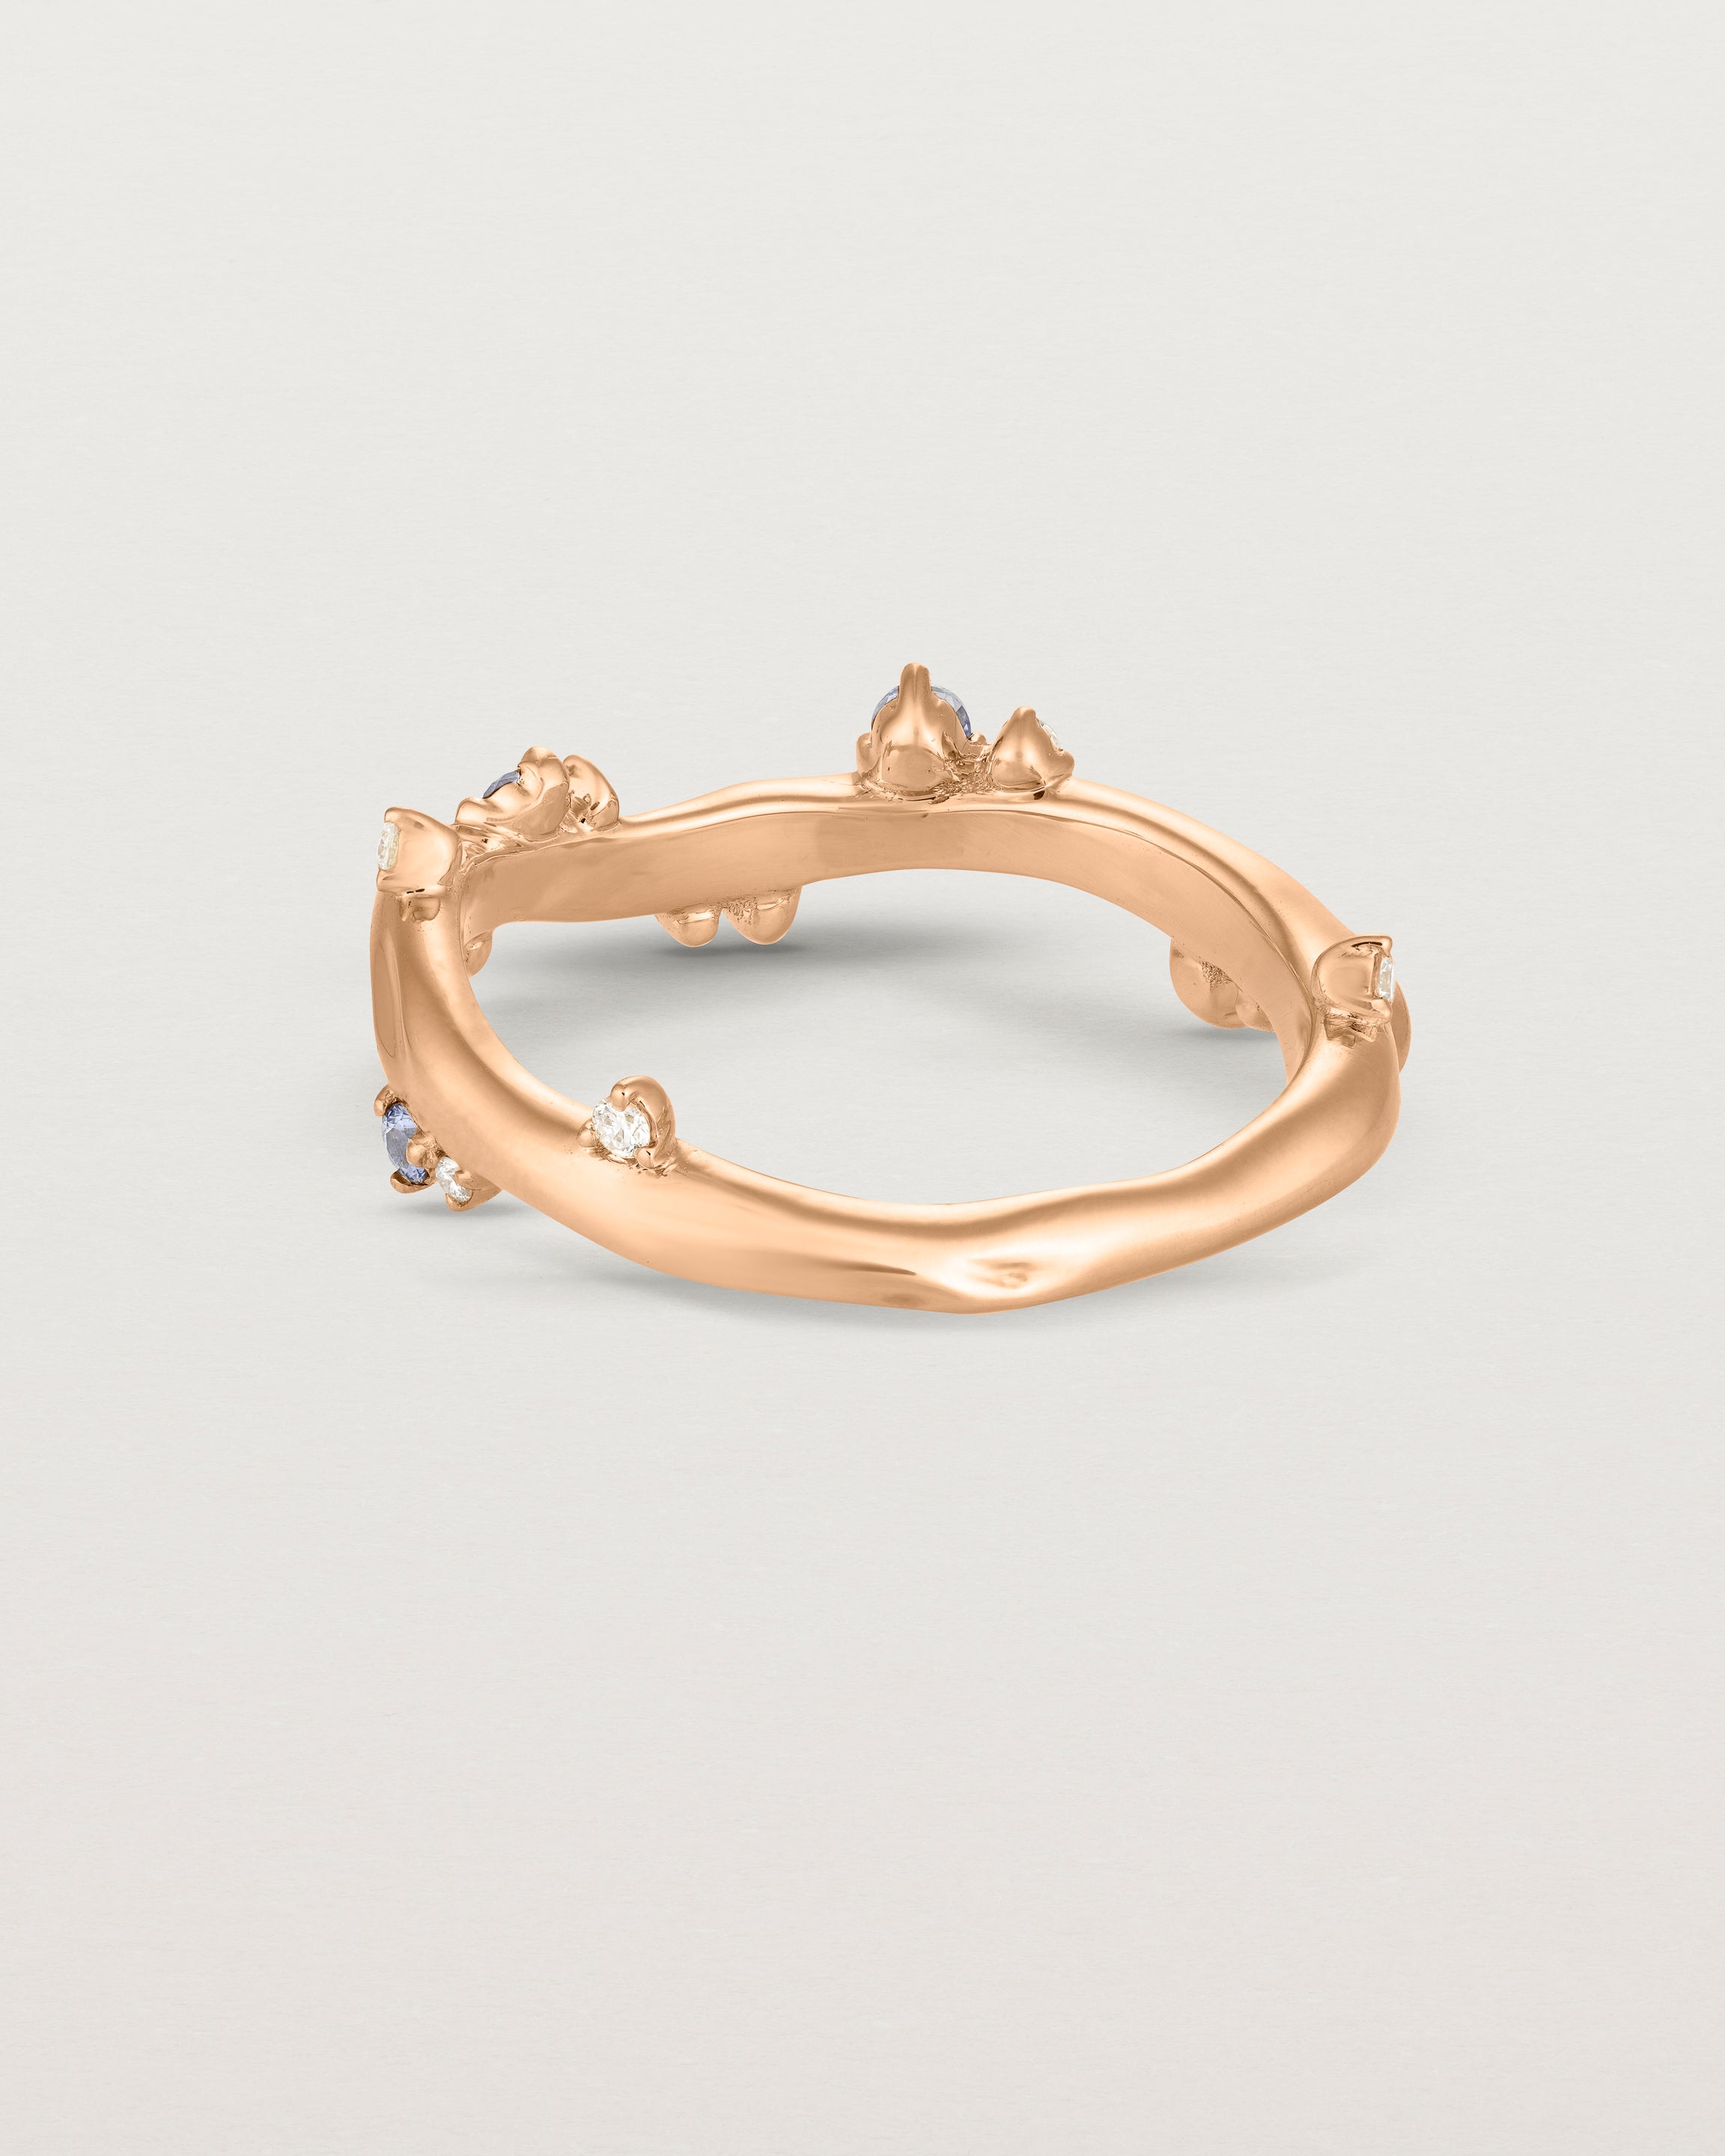 Back image of the Ember ring in rose gold featuring a scattering of white diamonds and blue sapphires.